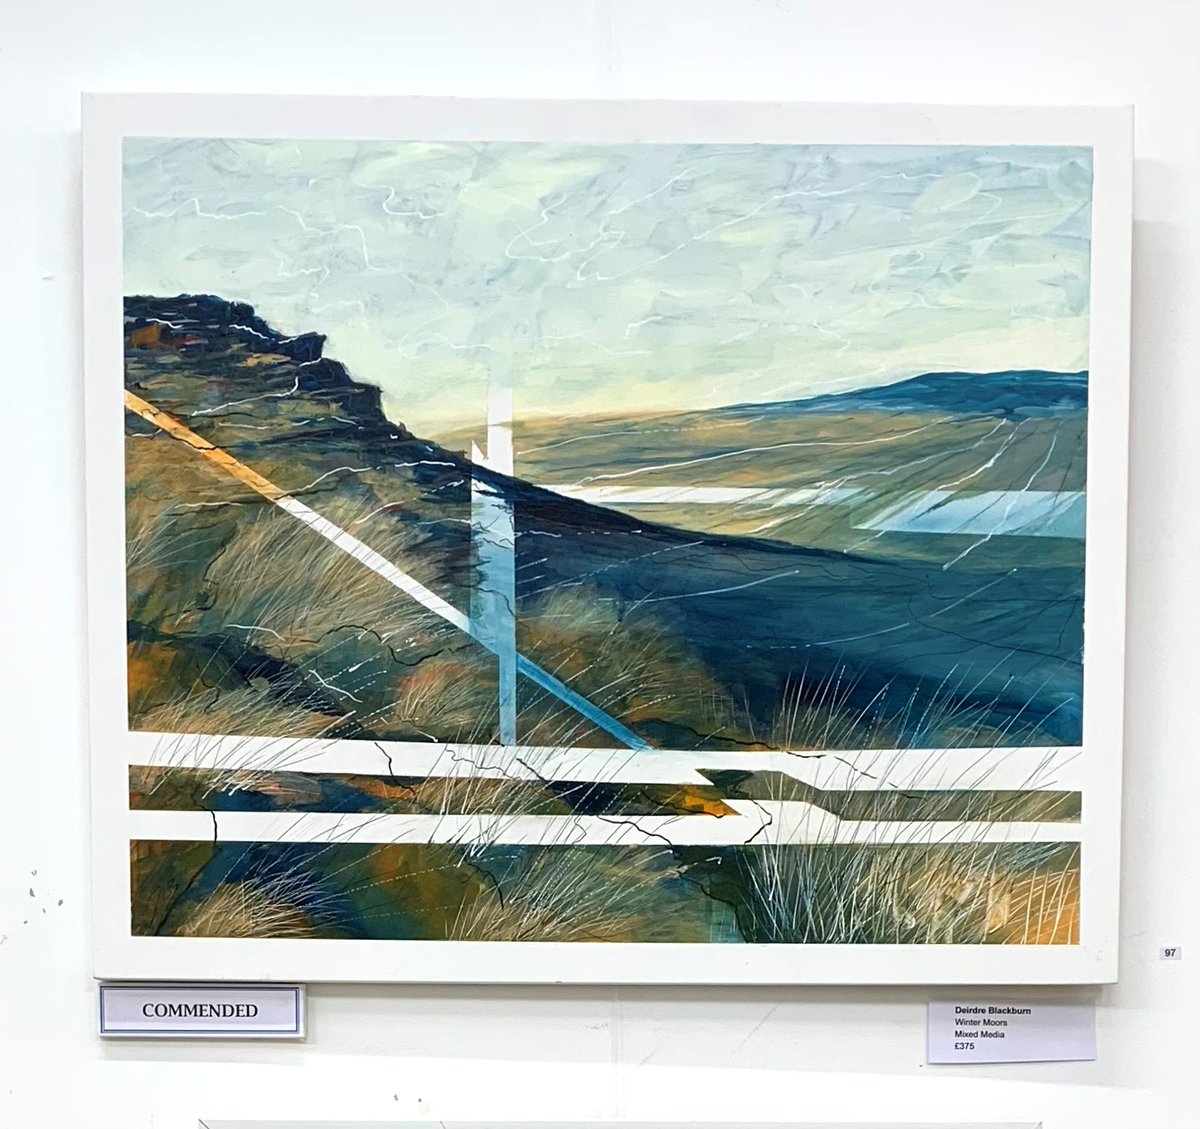 Our spring exhibition continues this week @stamfordarts and we hope you will visit and see our fantastic display of artwork. This dramatic landscape painting by Deirdre Blackburn, 'Winter Moors', received a well deserved commendation from our judge. Congrats Deirdre! #stamford